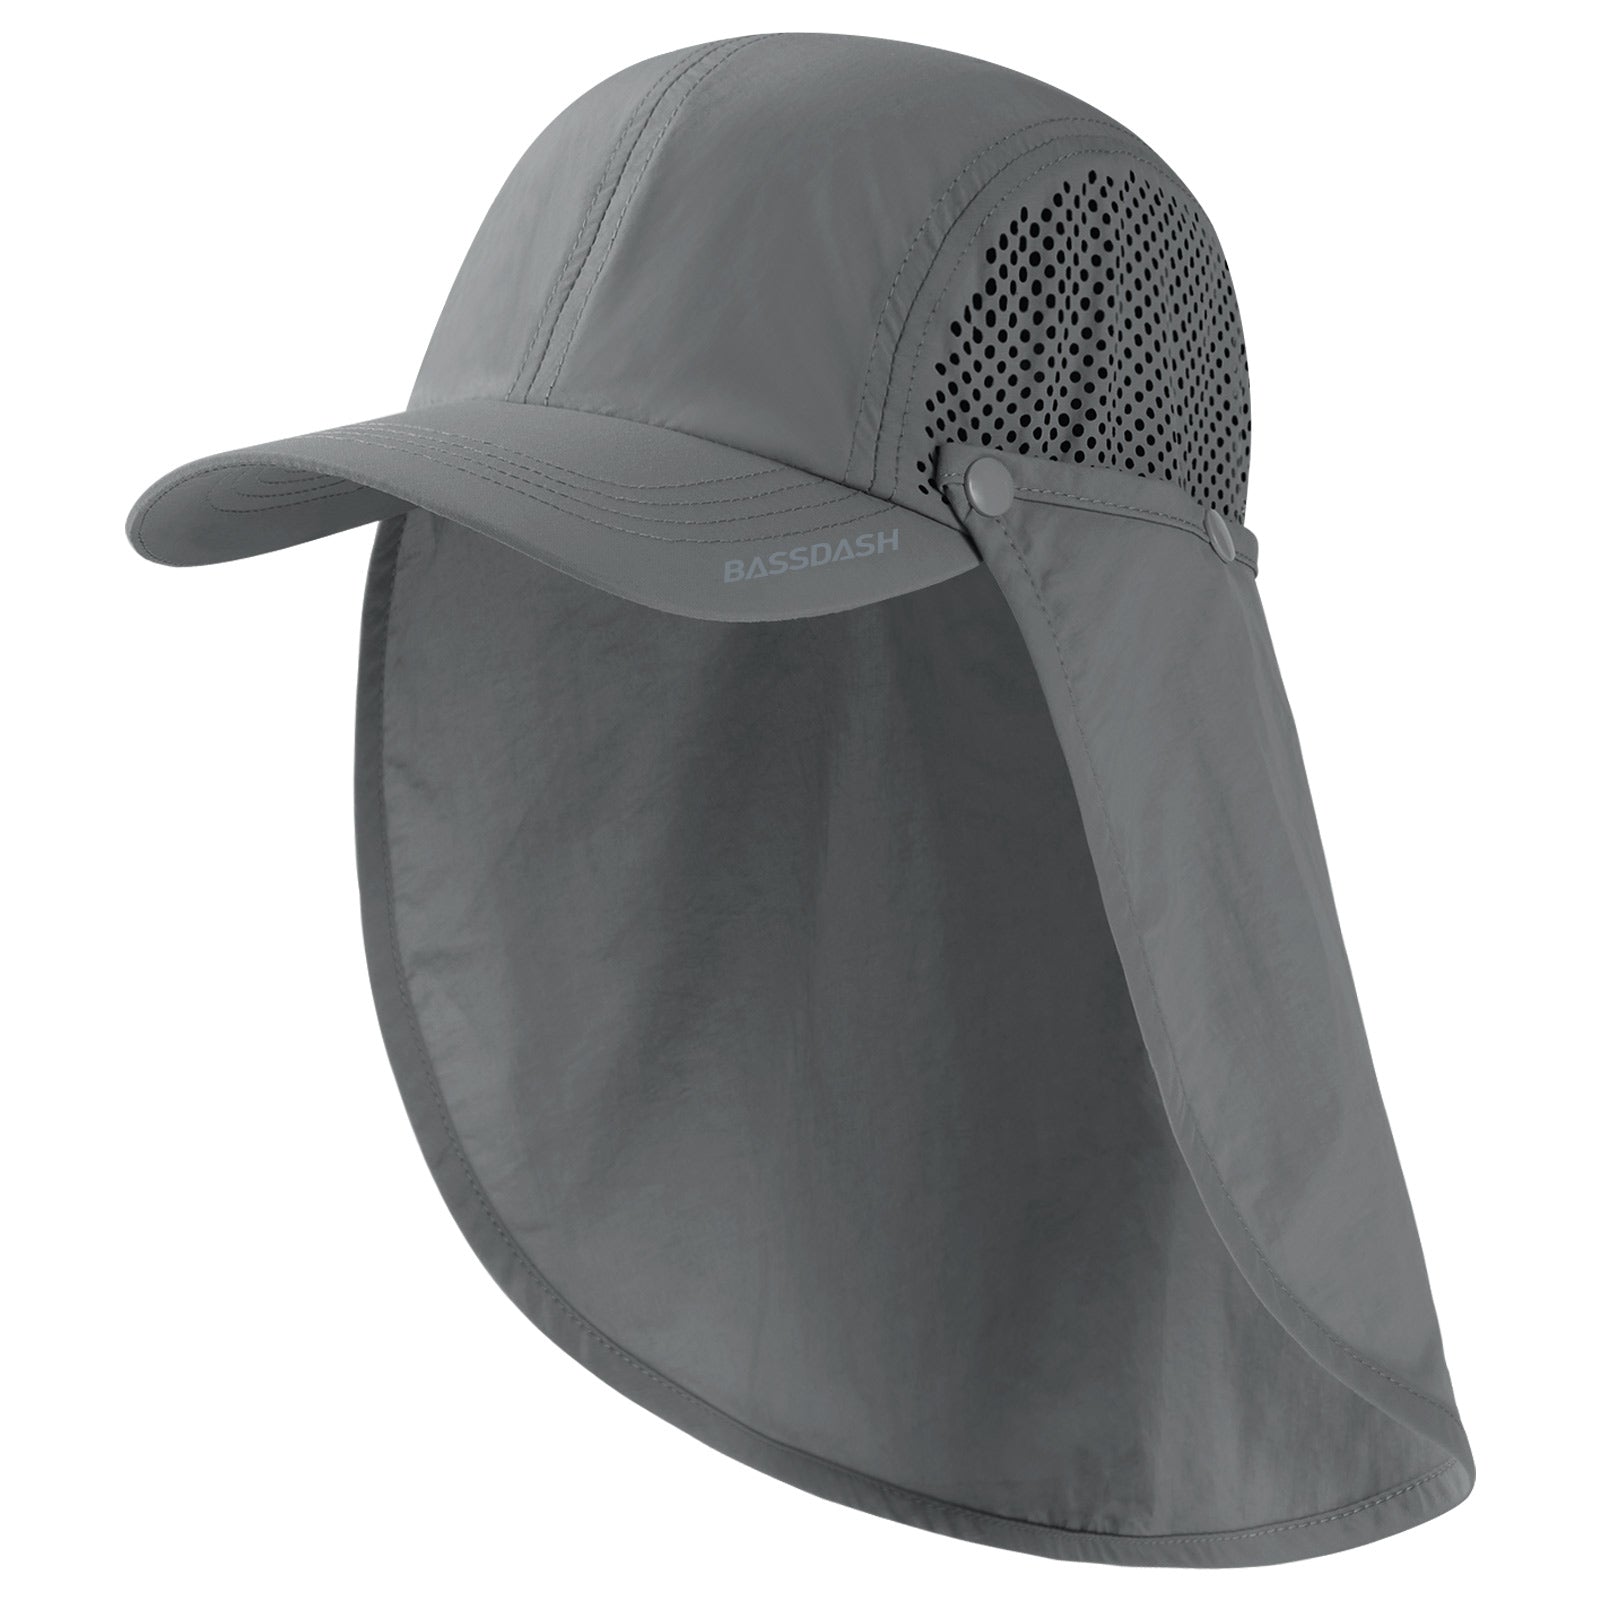 Karlsitek Sun Cap Fishing Hat,360UV Sun Protection with UPF 50+ Neck & Face Flap Cover, adult Unisex, Size: One size, Gray